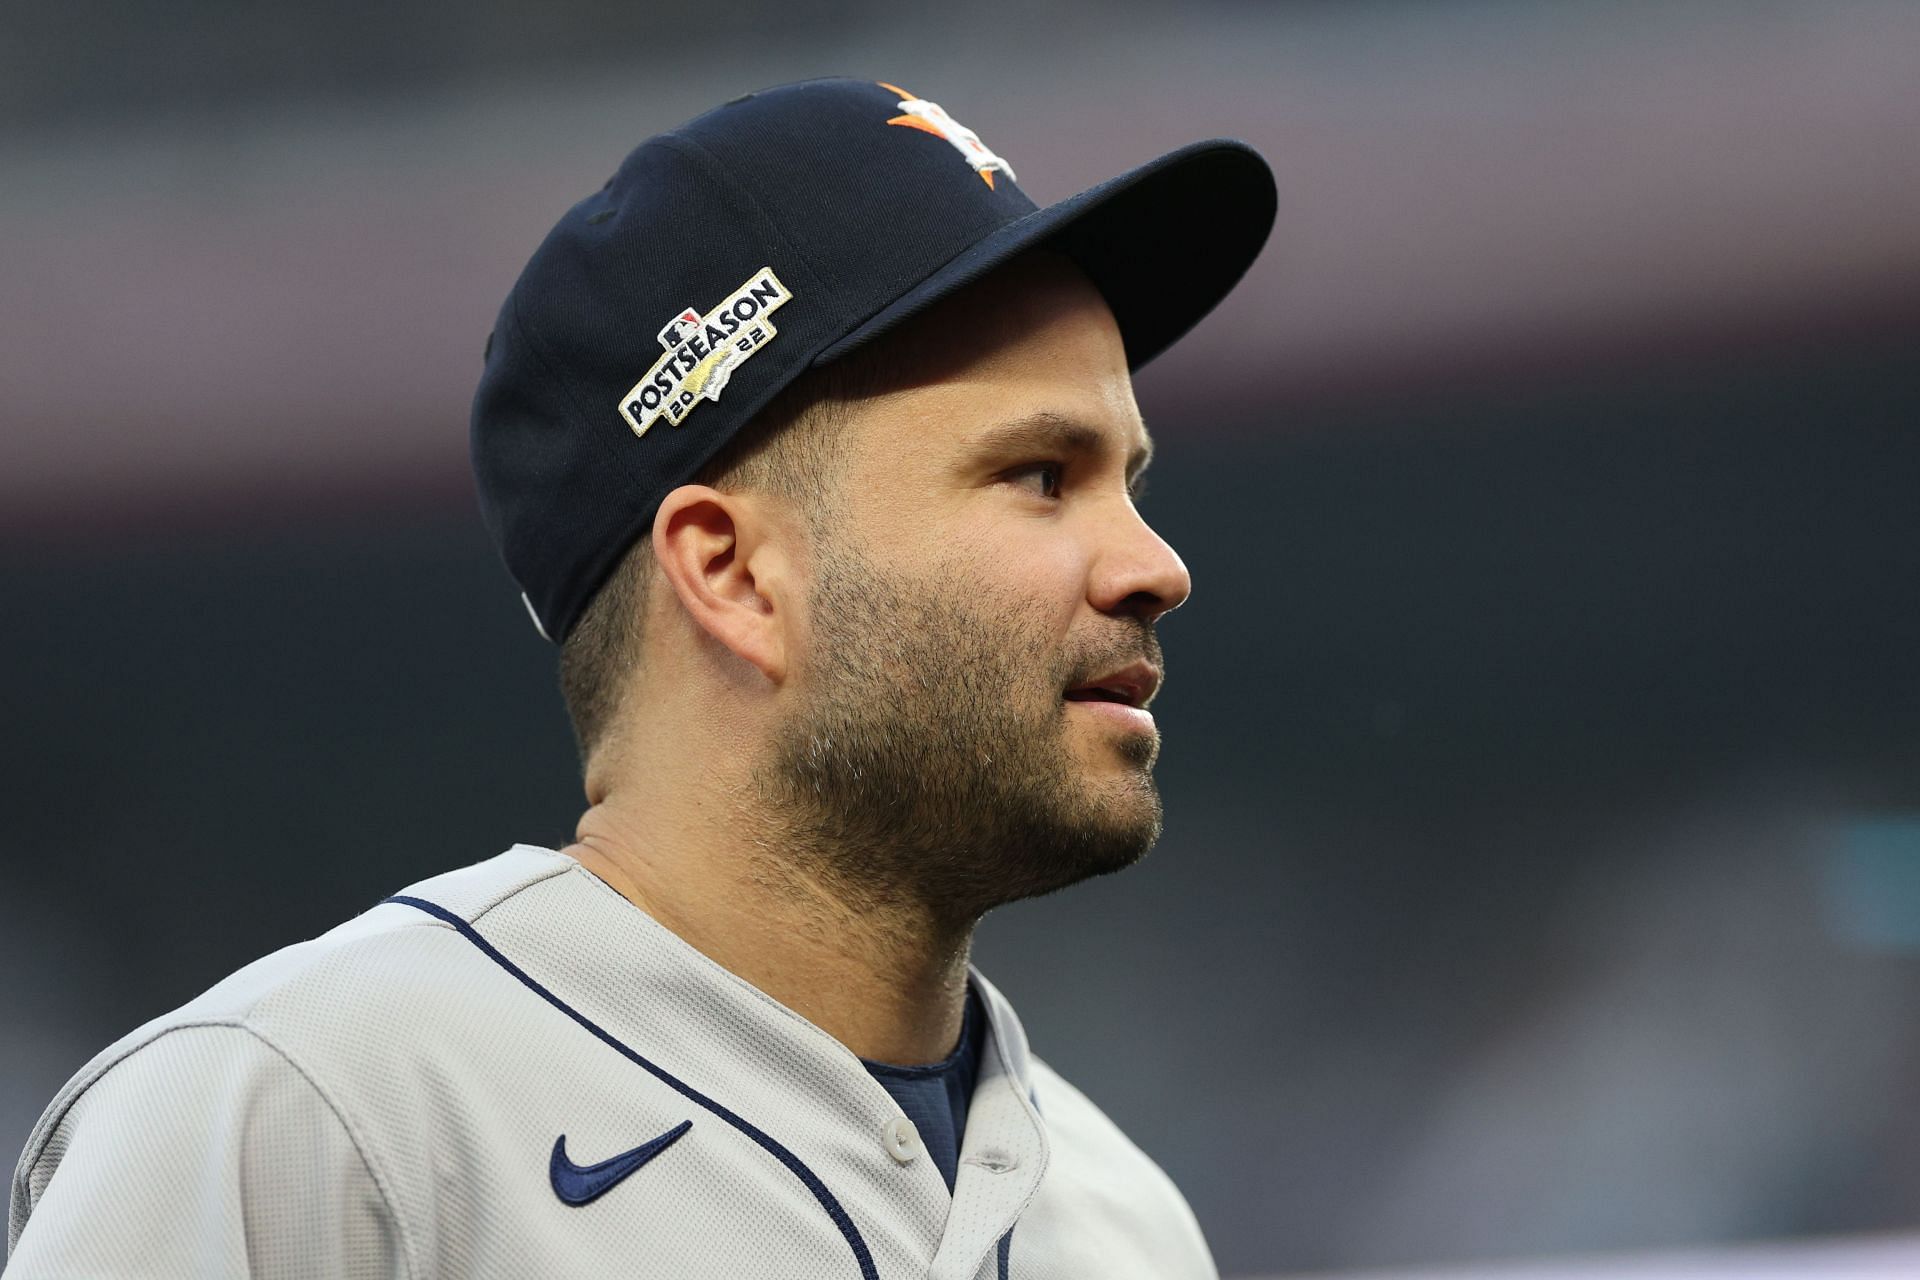 Jose Altuve has spent his entire career with the Houston Astros